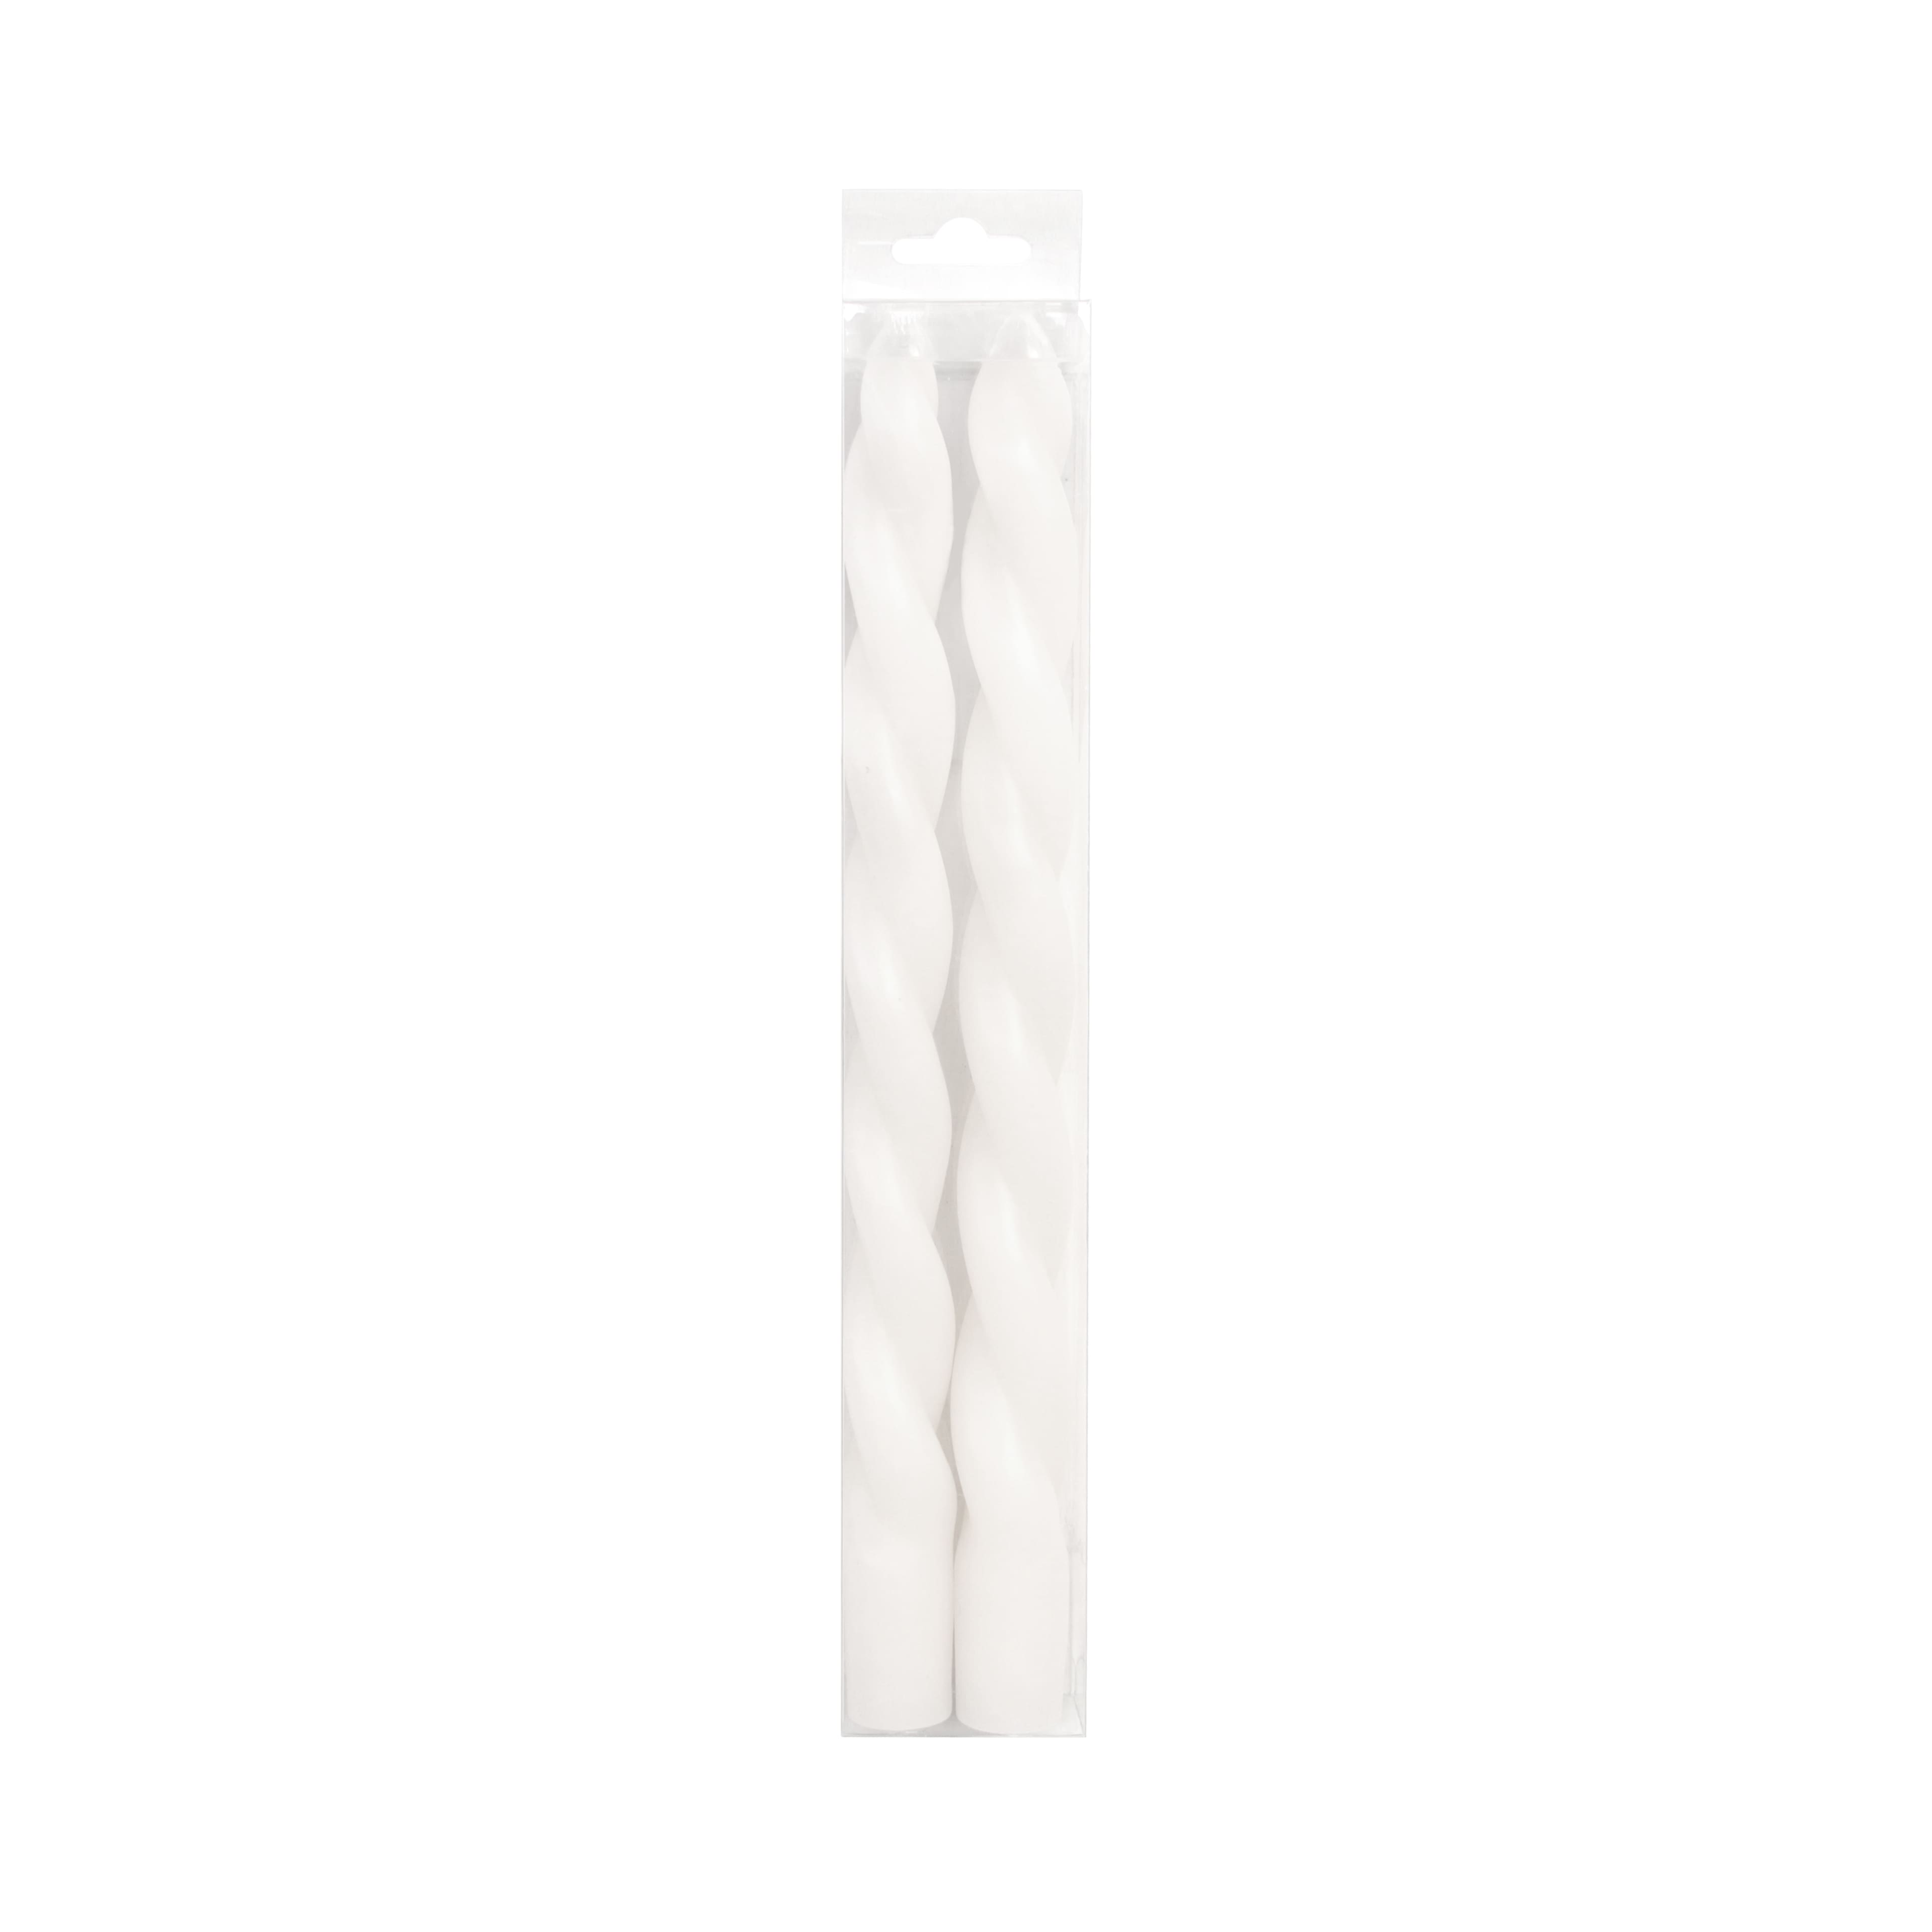 Basic Elements™ 10" Twisted Taper Candles by Ashland®, 2ct.